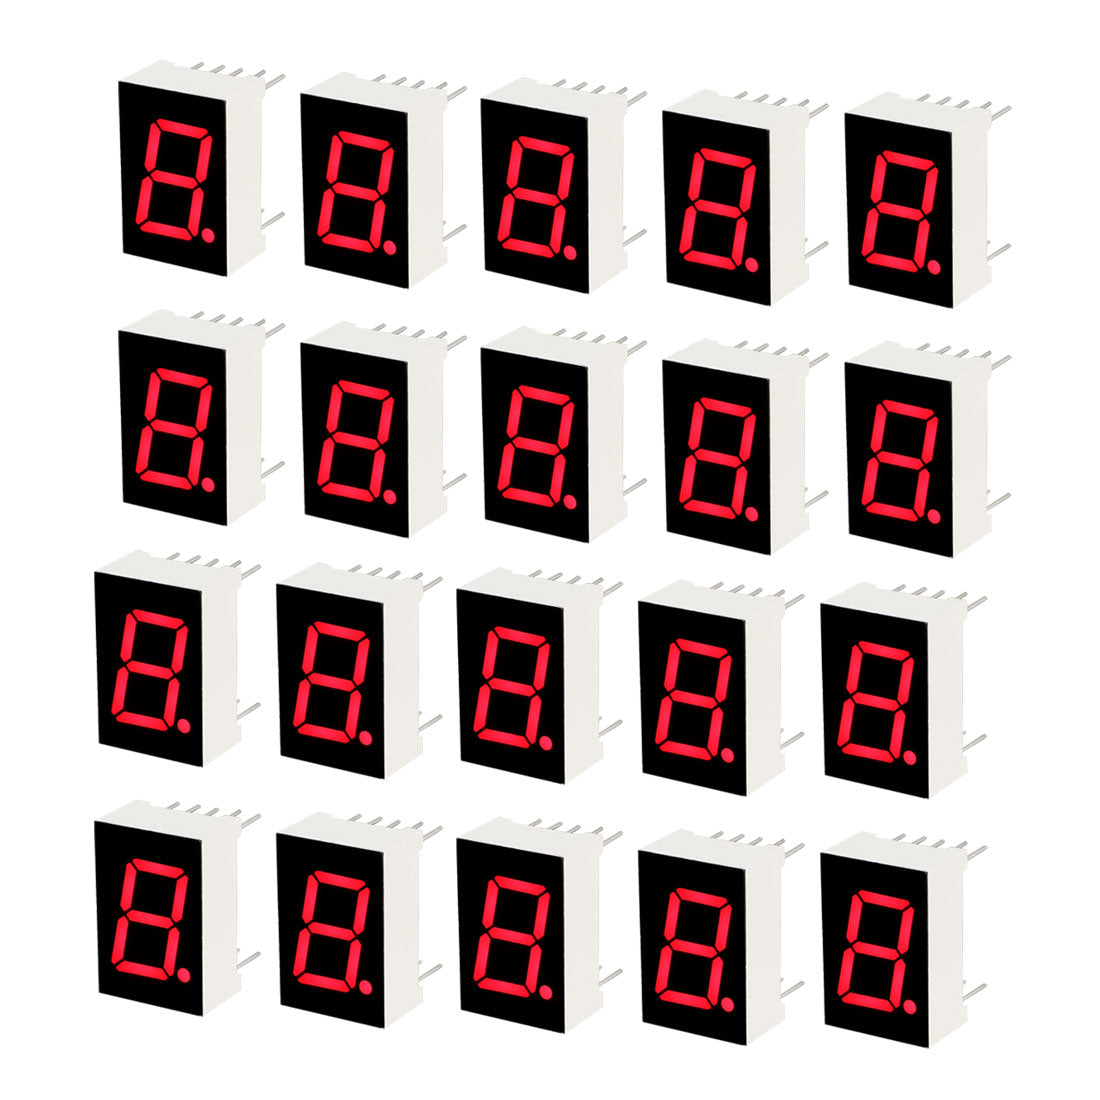 uxcell Uxcell Common Cathode 10 Pin 1 Bit 7 Segment 0.75 x 0.5 x 0.31 Inch 0.5" Red LED Display Digital Tube 20pcs